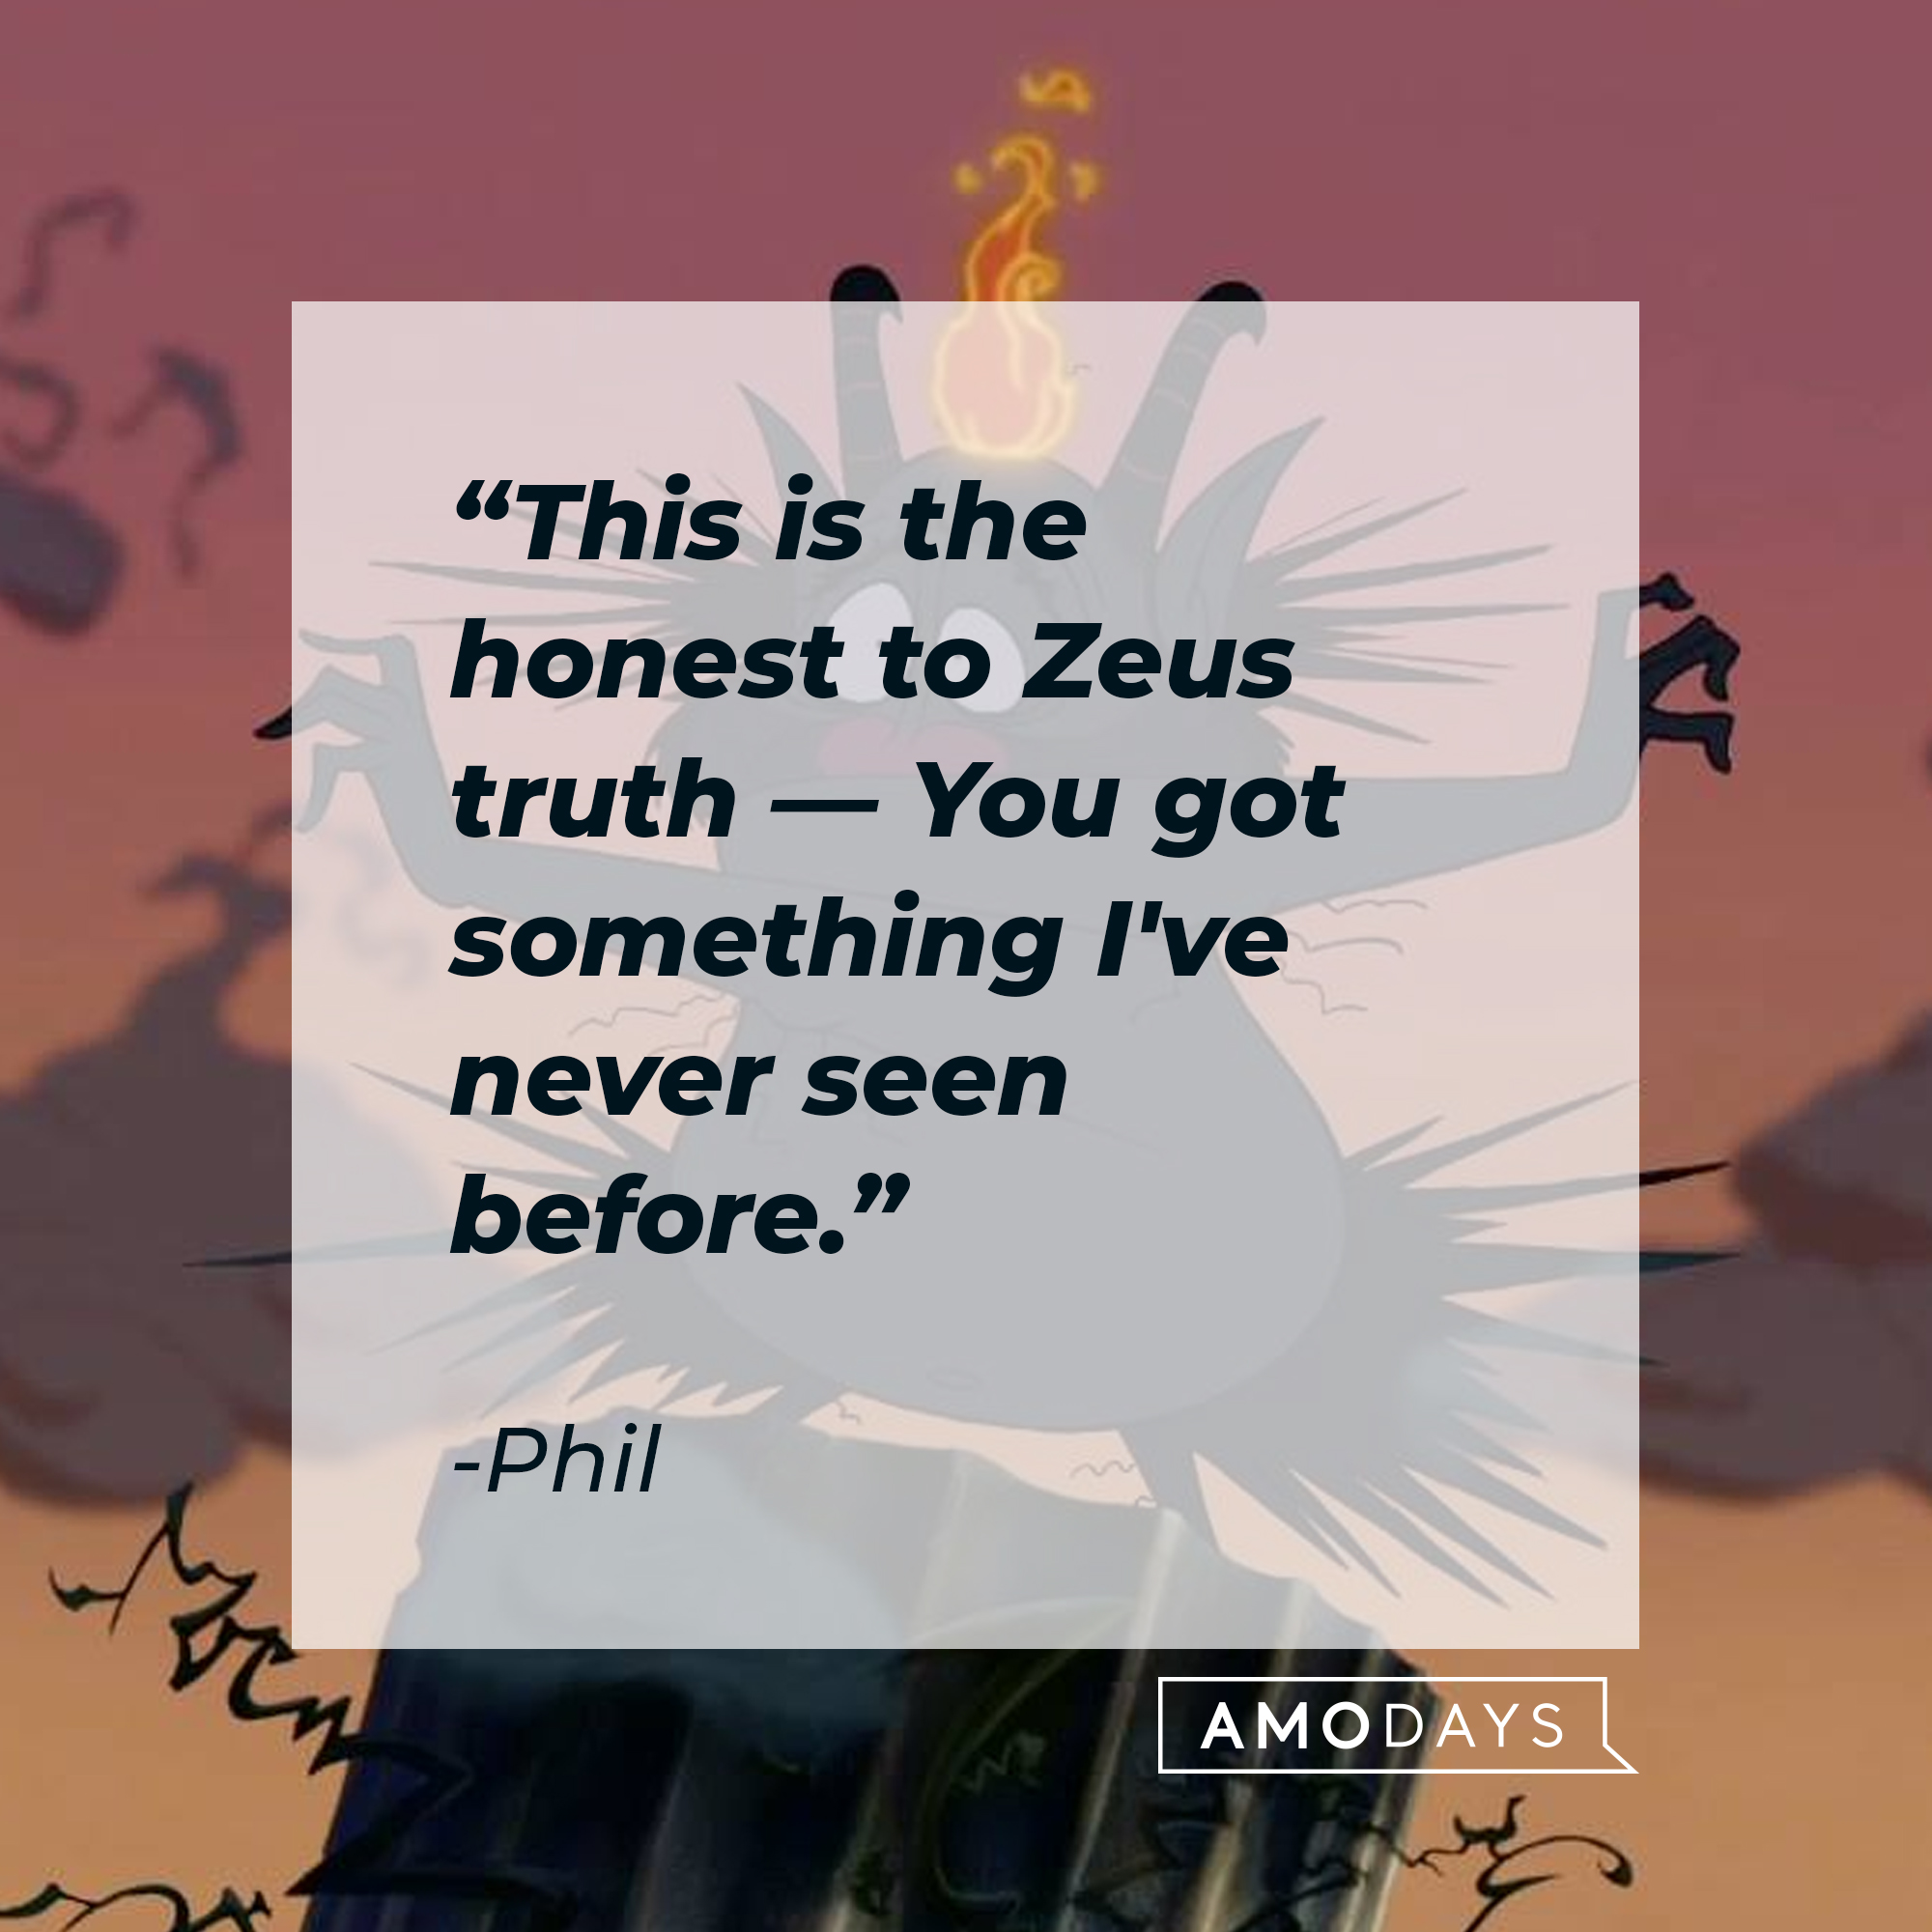 A character from the "Hercules" movie with Phil's quote: "This is the honest to Zeus truth — You got something I've never seen before." | Source: Facebook.com/DisneyHercules